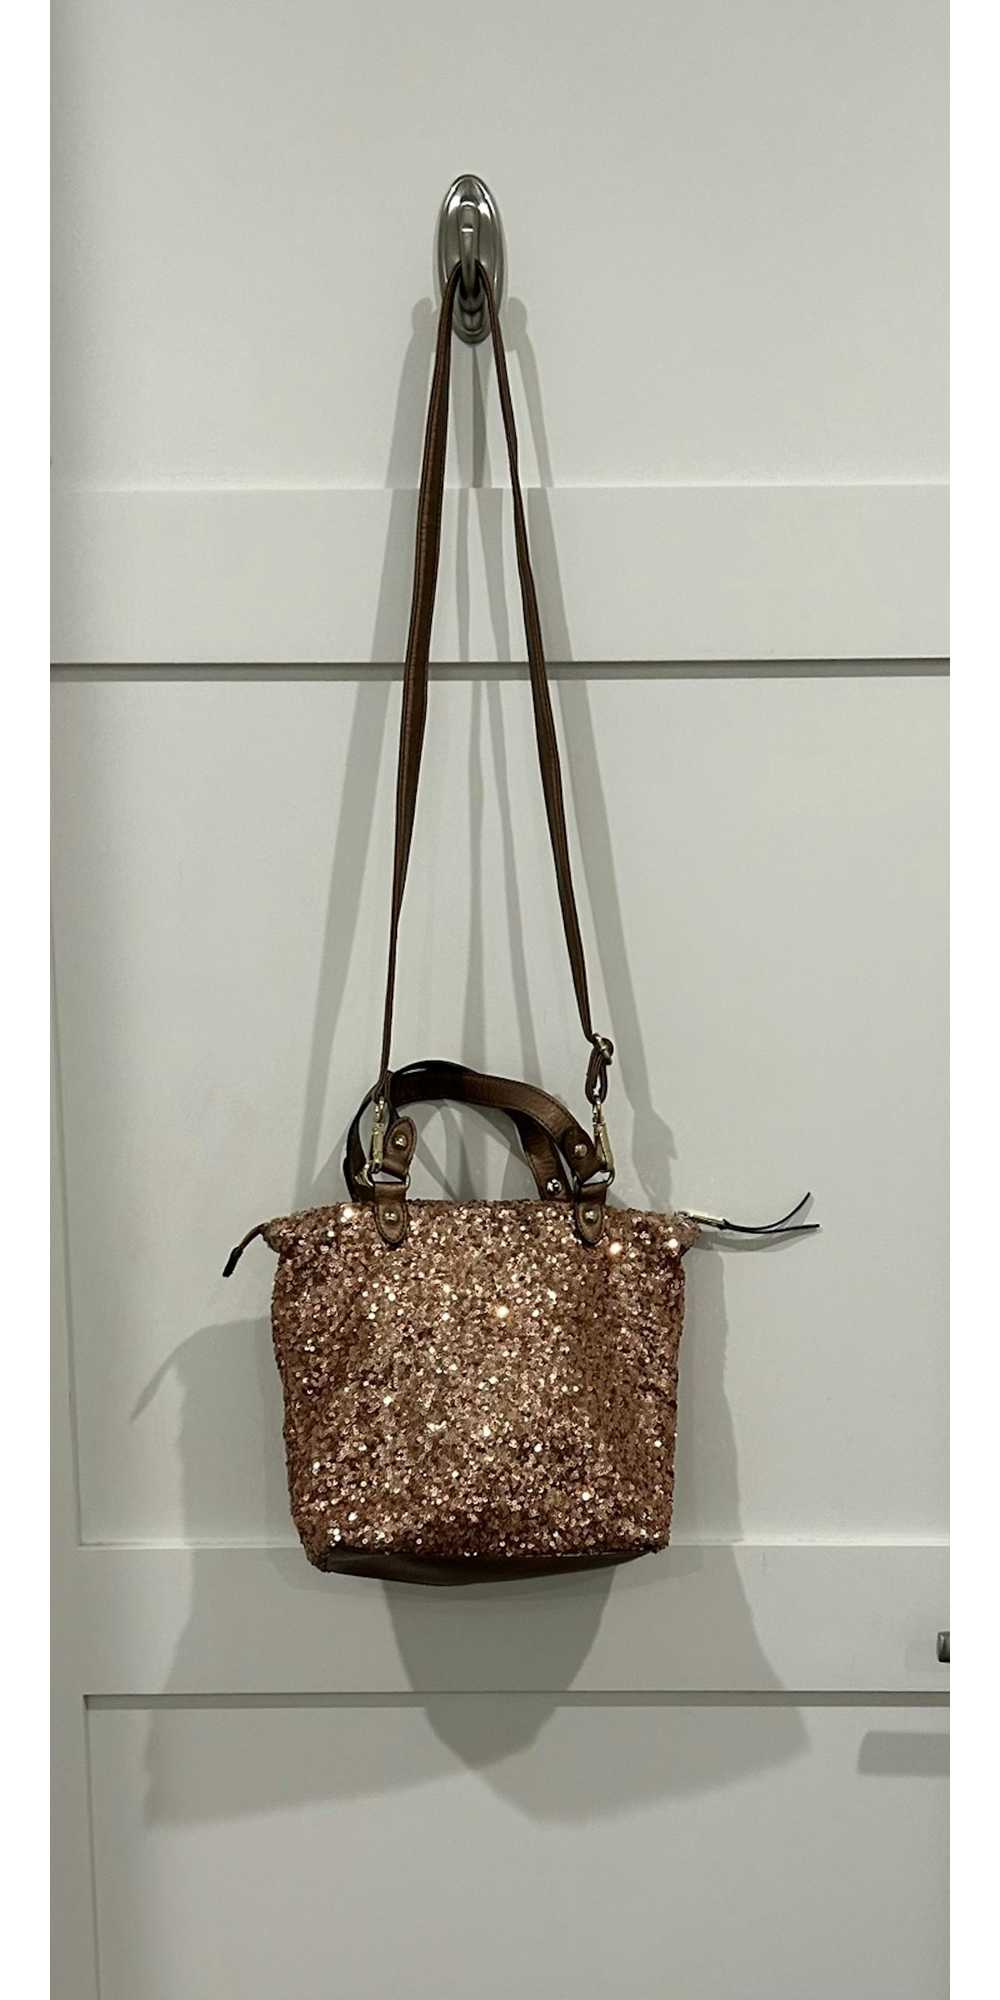 Juicy Couture Juicy Couture Sequin Crossbody Bag - image 4